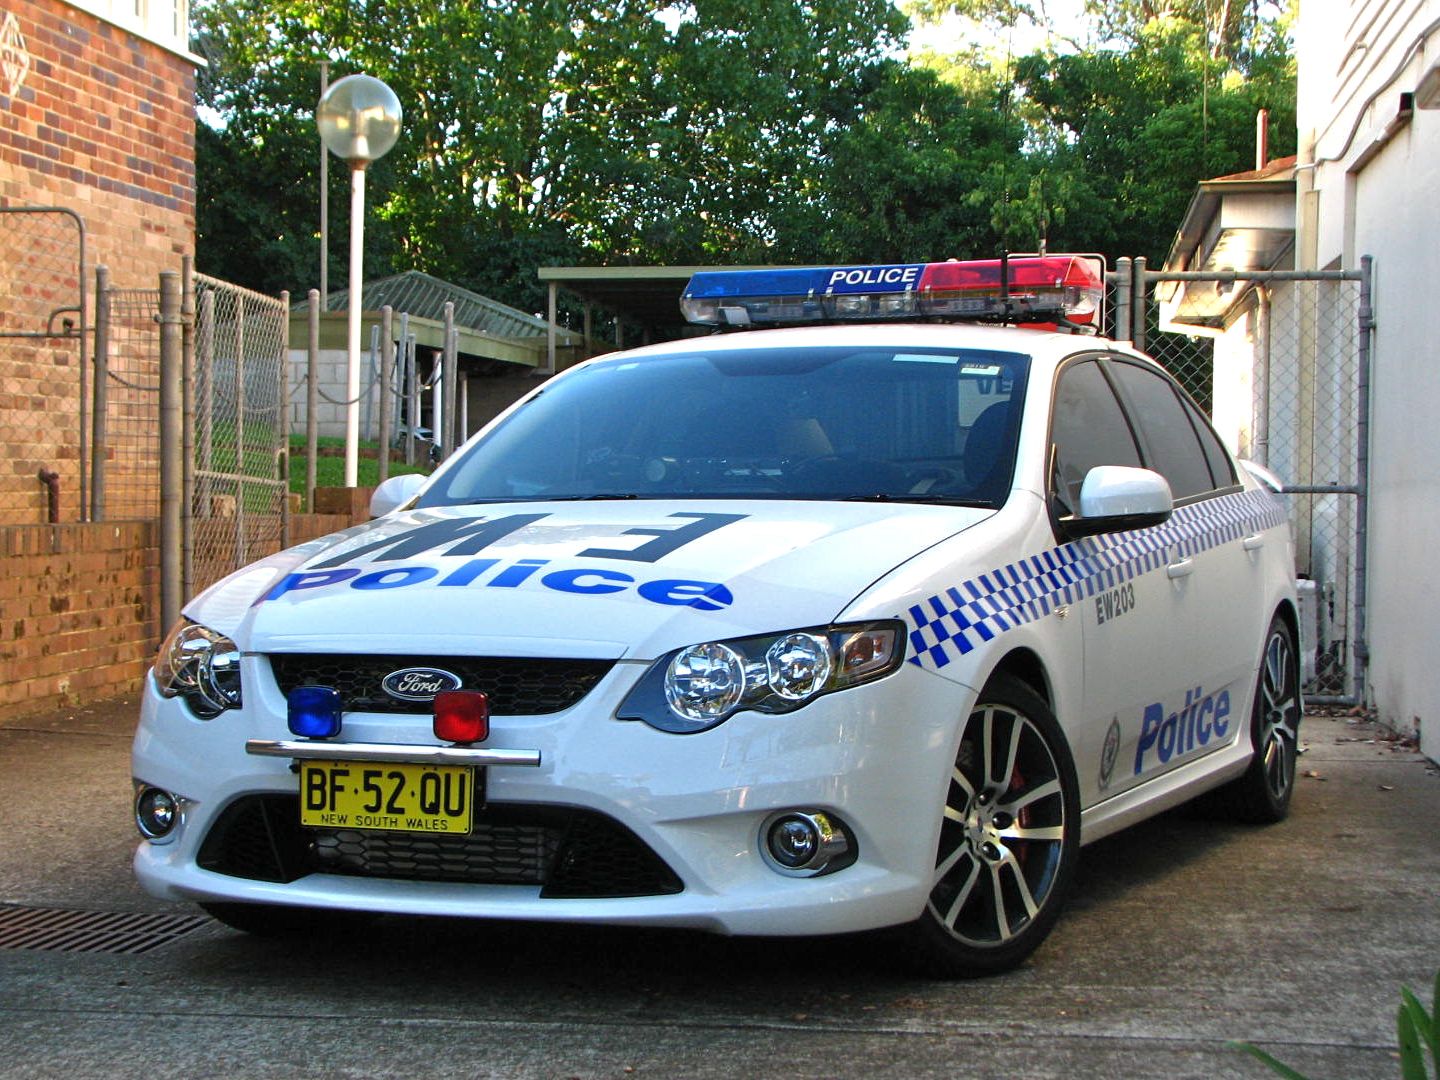 a white police car parked in front of a building